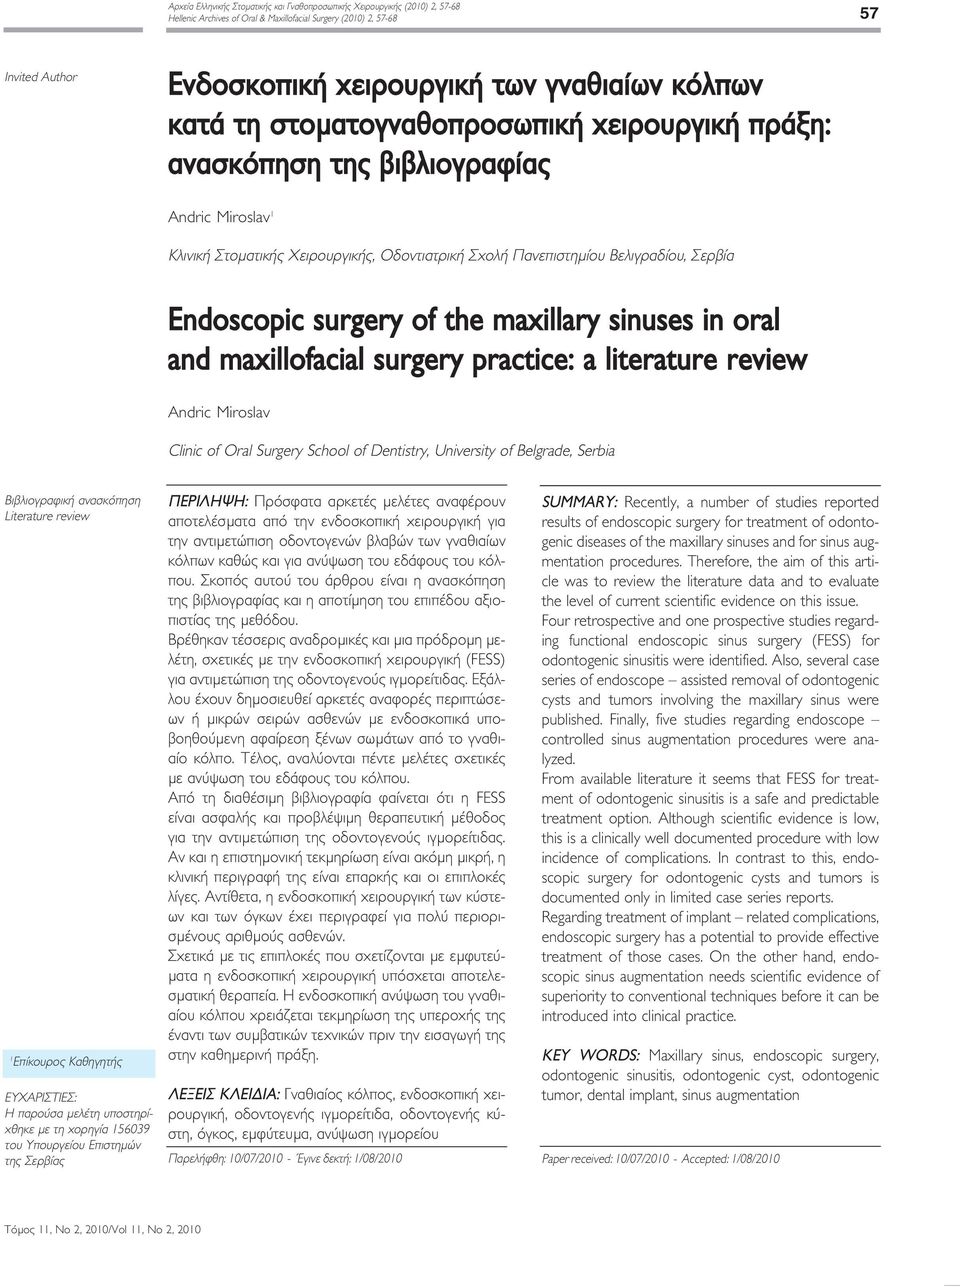 surgery of the maxillary sinuses in oral and maxillofacial surgery practice: a literature review Andric Miroslav Clinic of Oral Surgery School of Dentistry, University of Belgrade, Serbia